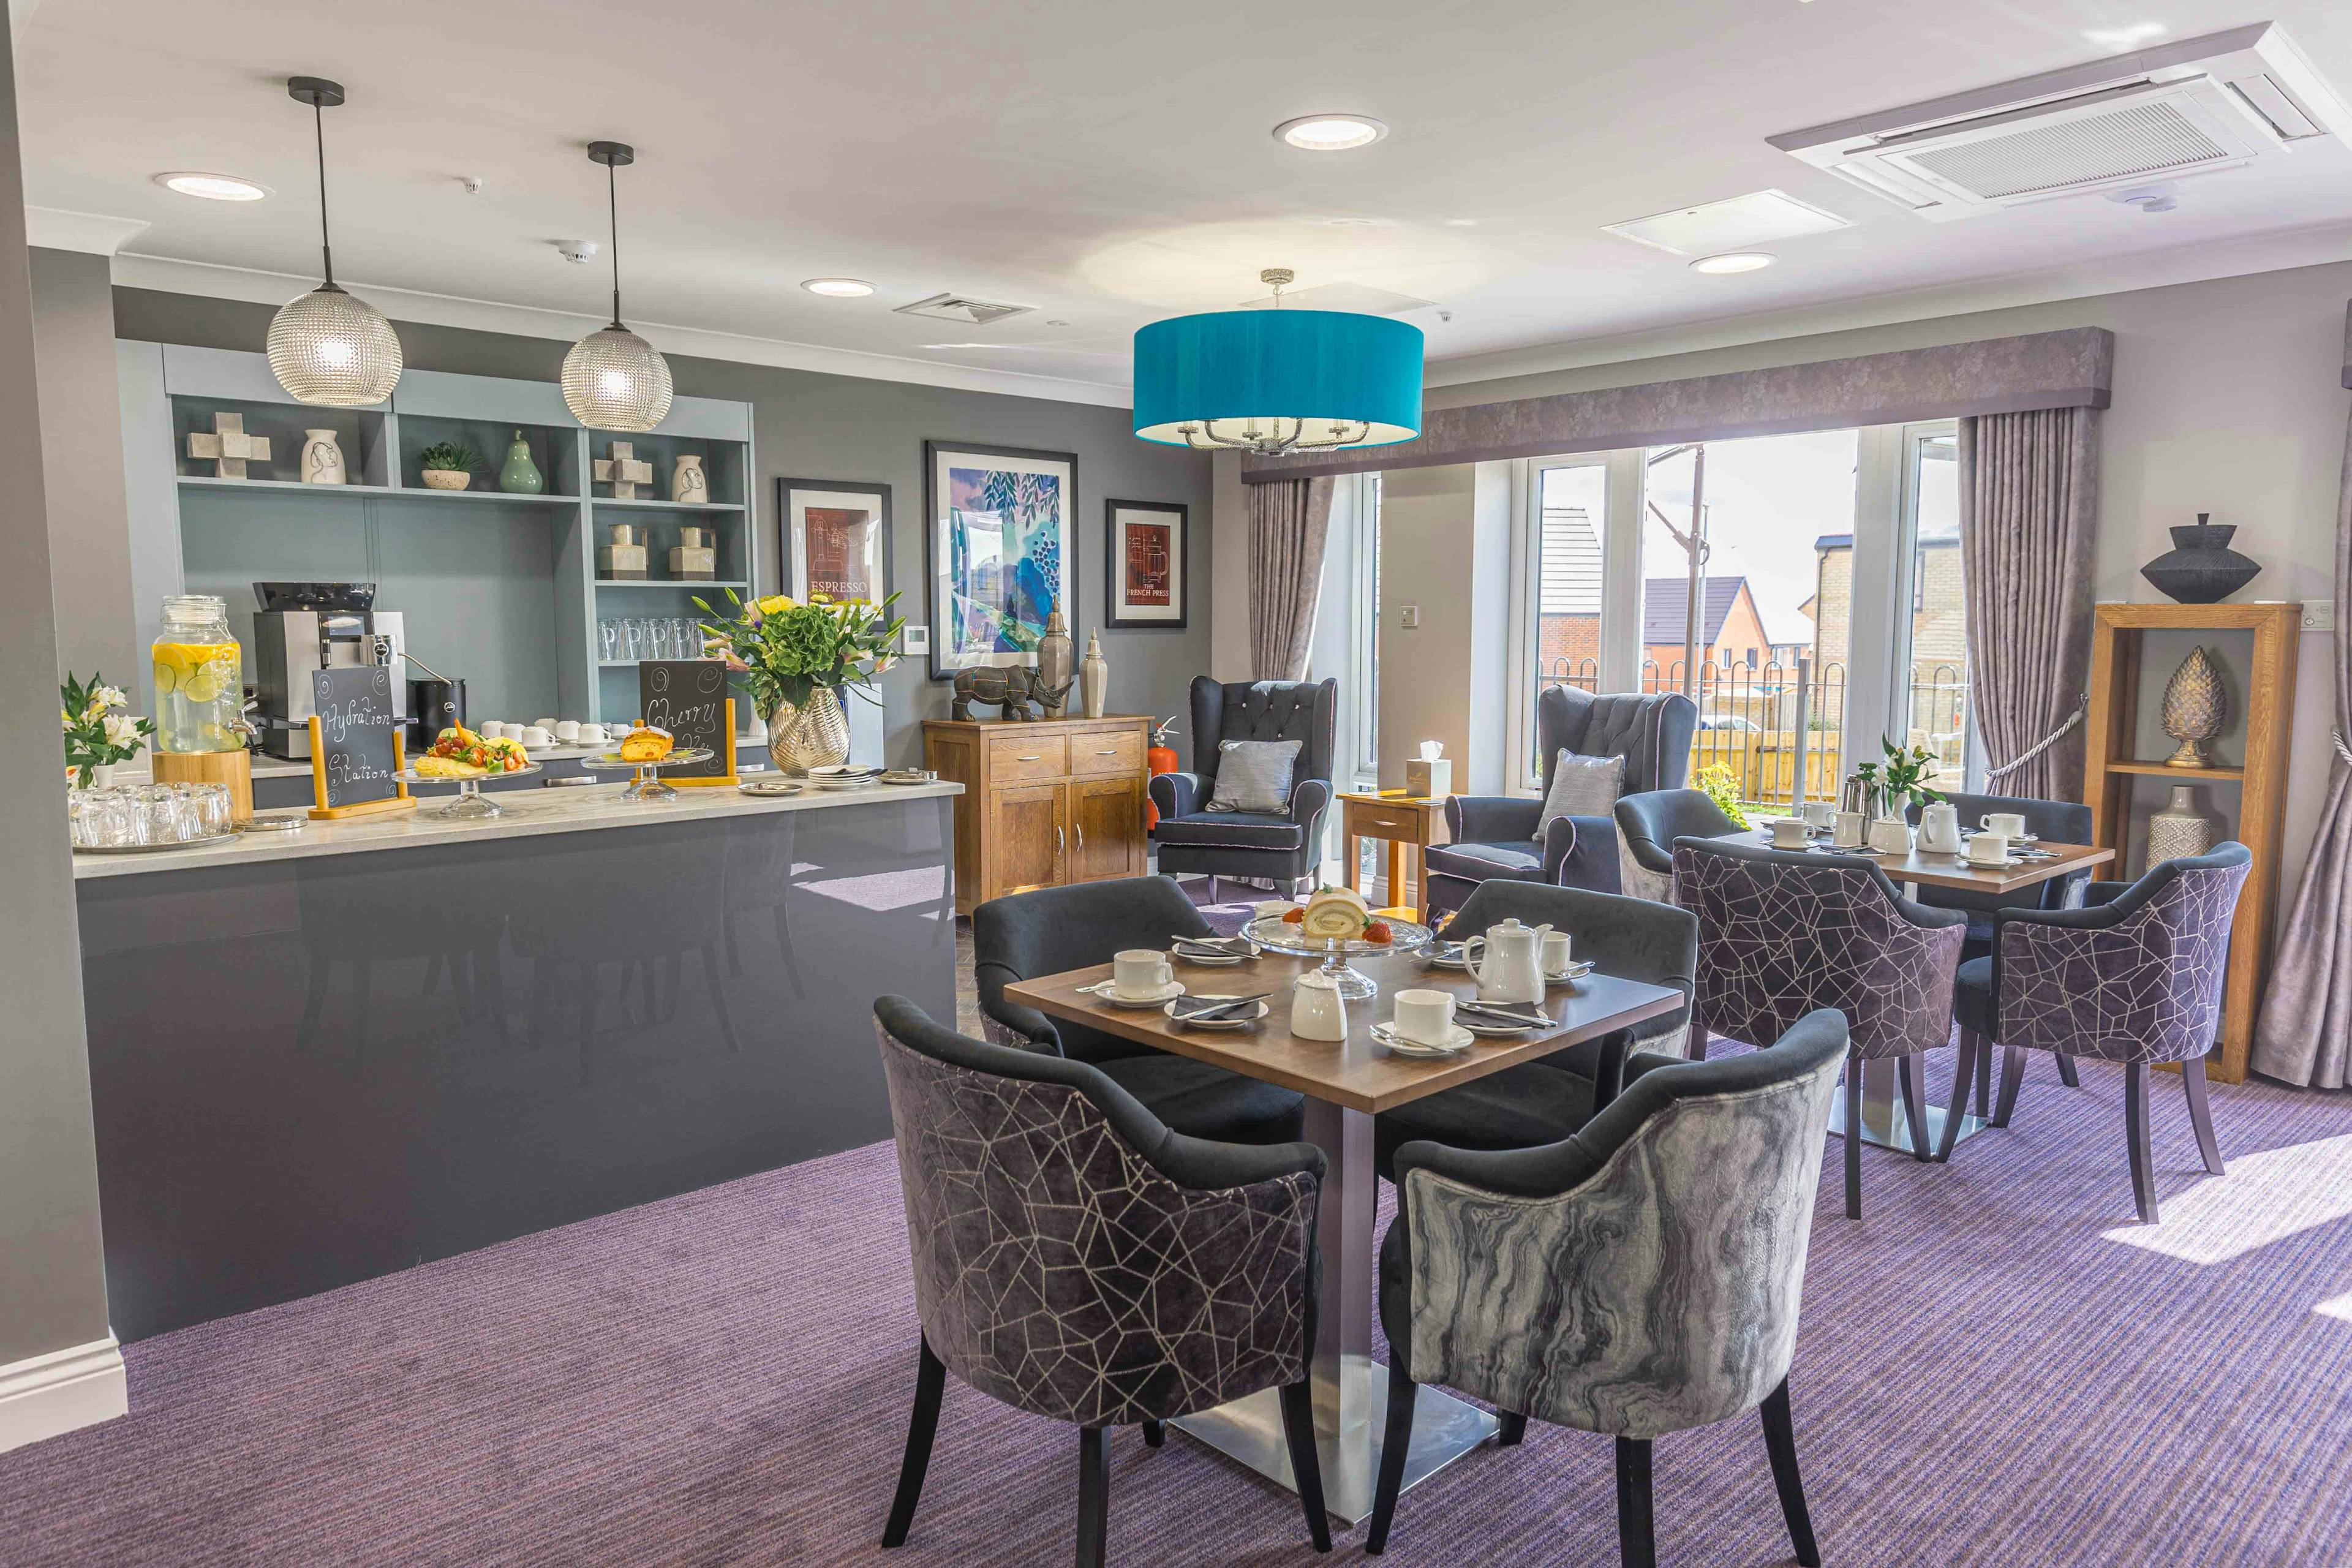 Cafe at Elgar Court Care Home in Malvern, Worcestershire